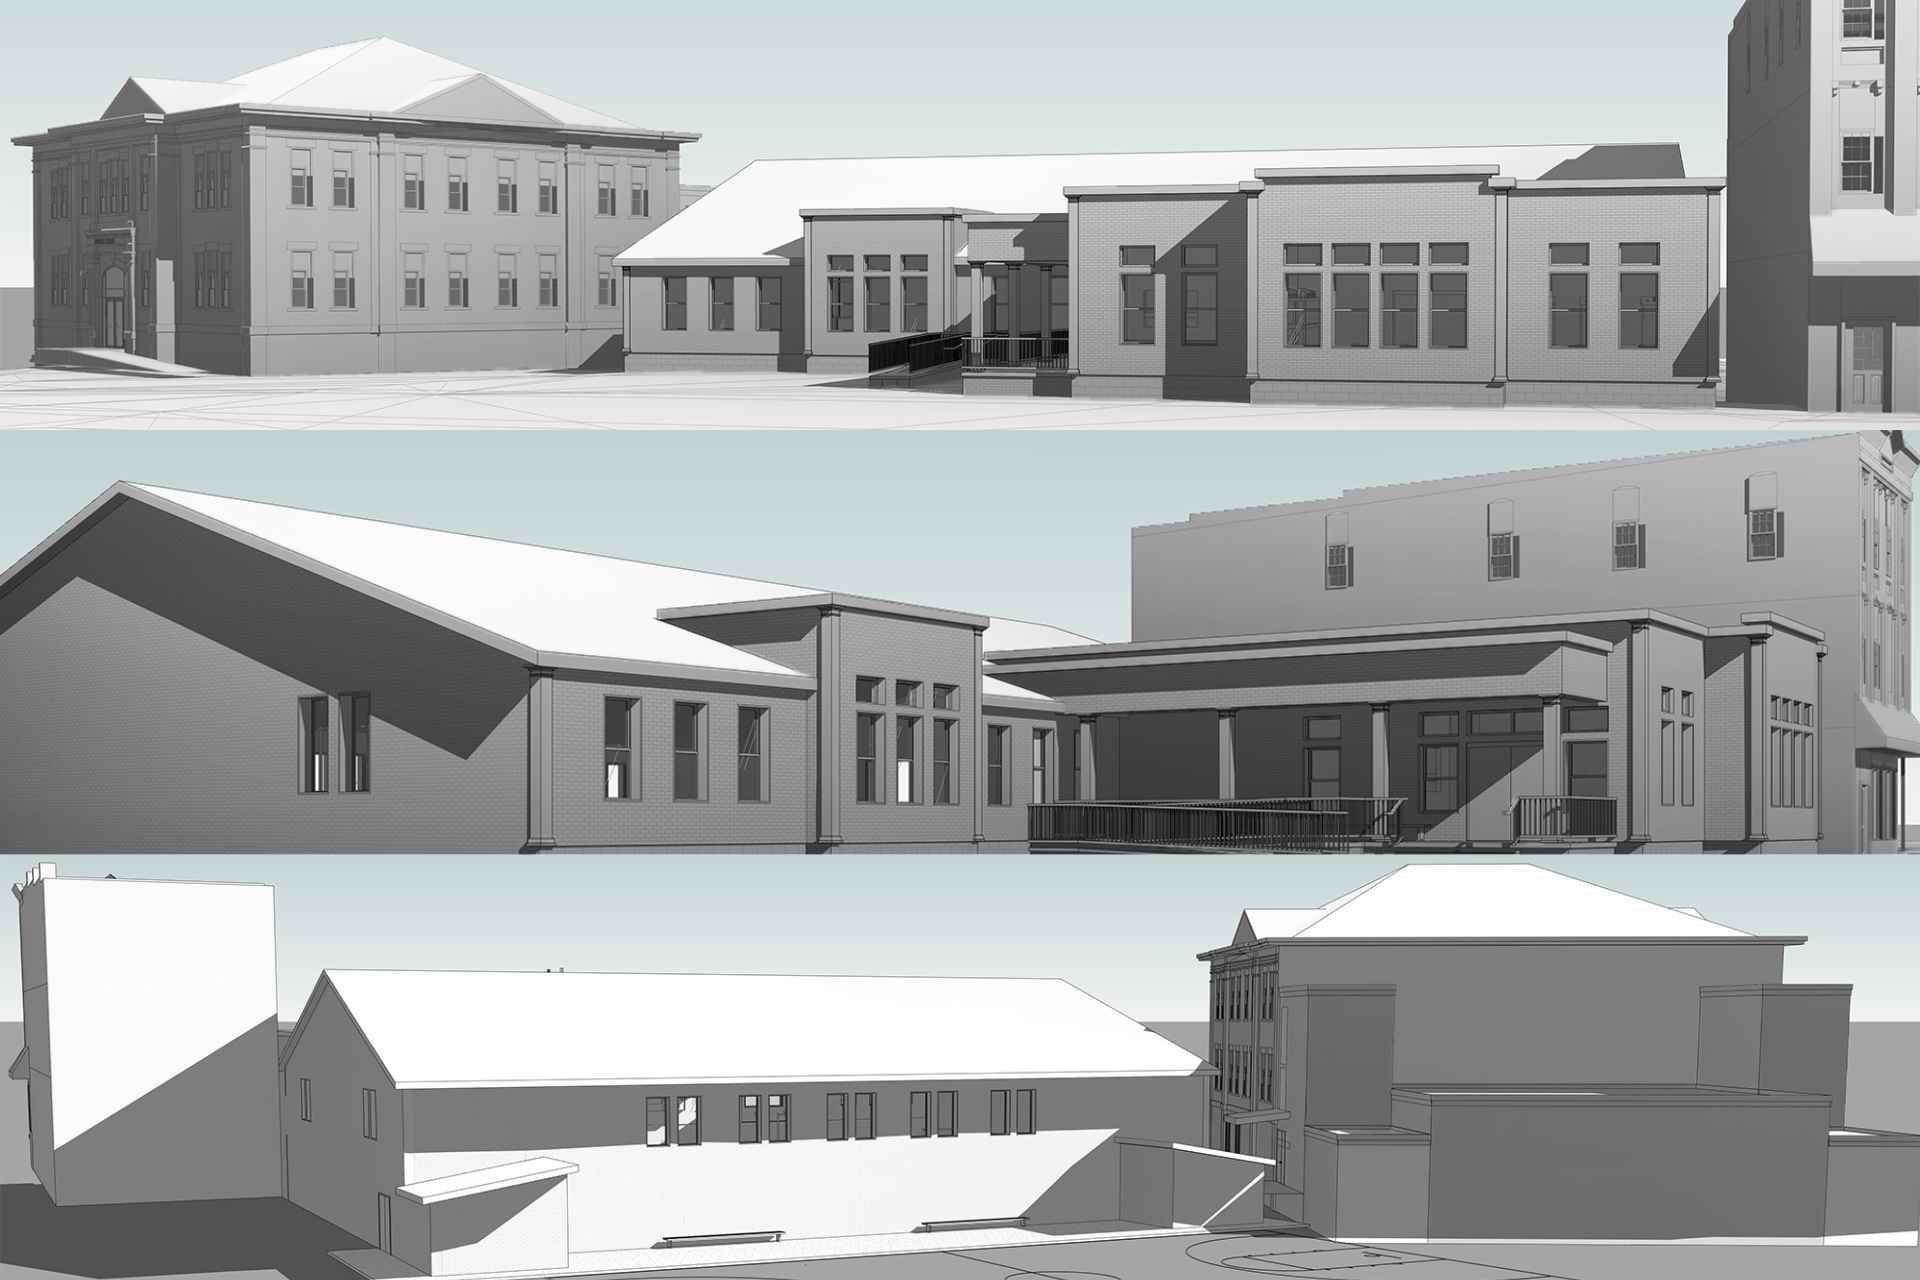 One possible rendering of the proposed SYCC addition.